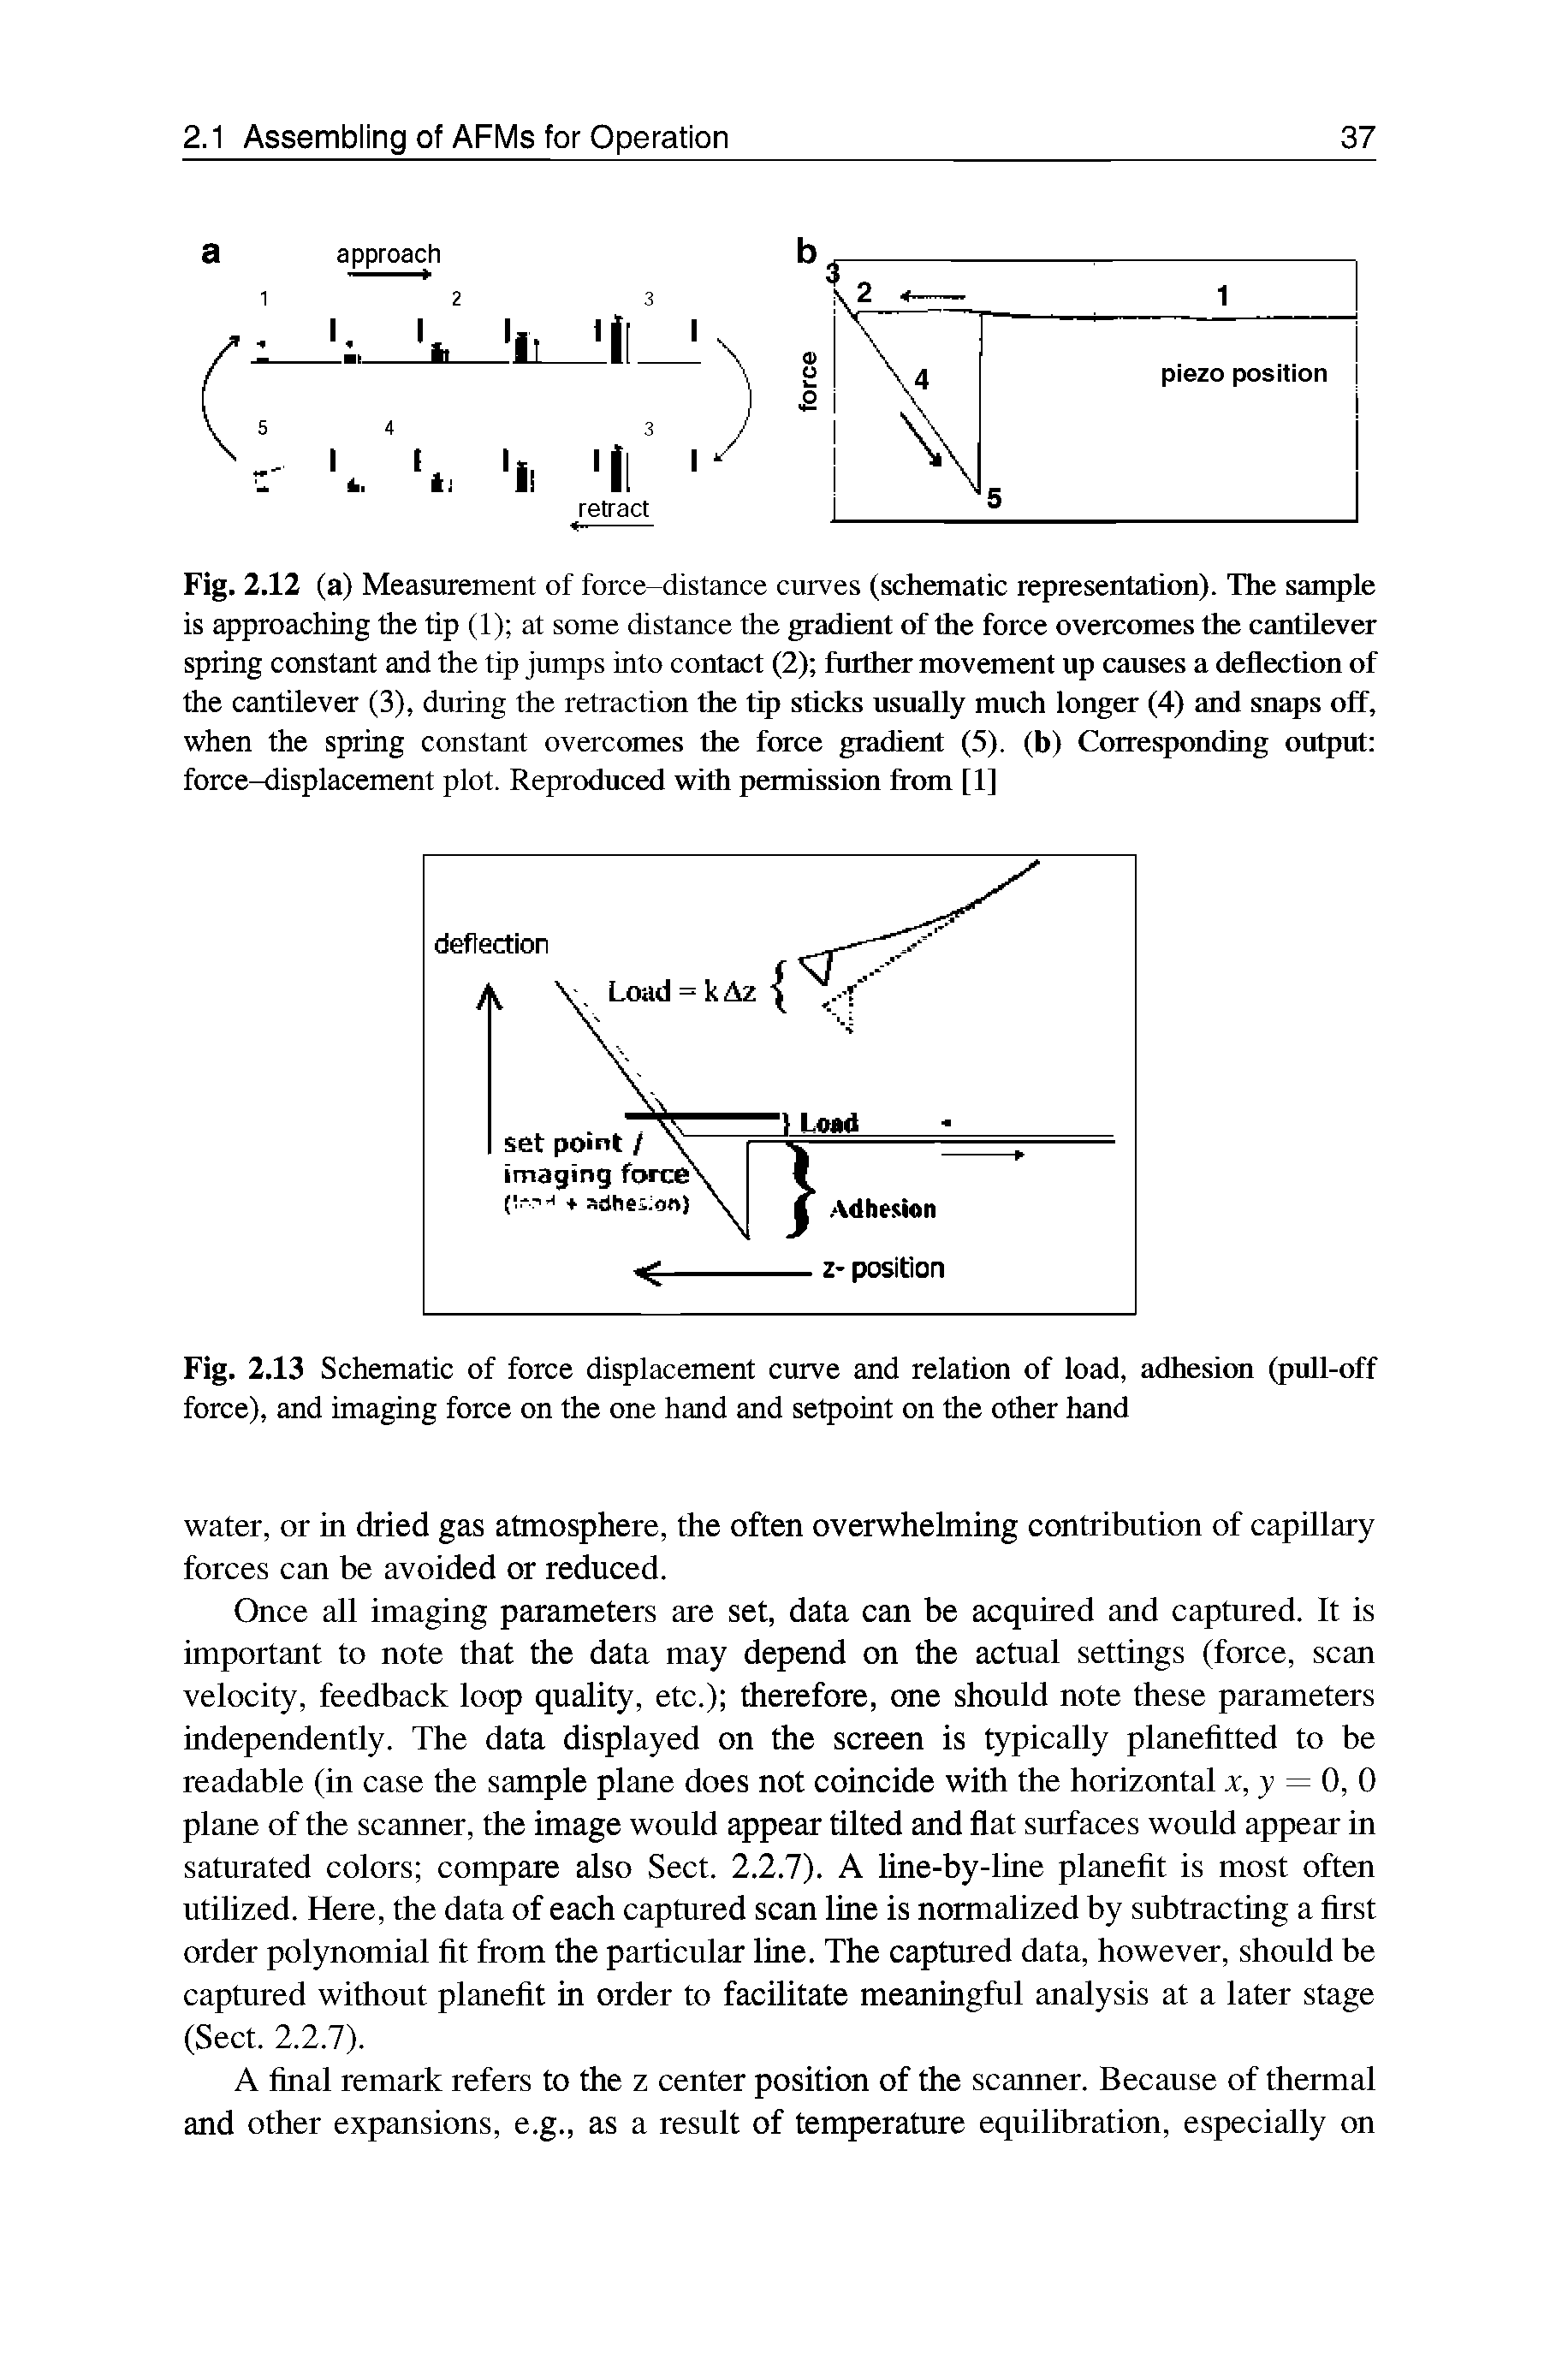 Fig. 2.13 Schematic of force displacement curve and relation of load, adhesion (pull-off force), and imaging force on the one hand and setpoint on the other hand...